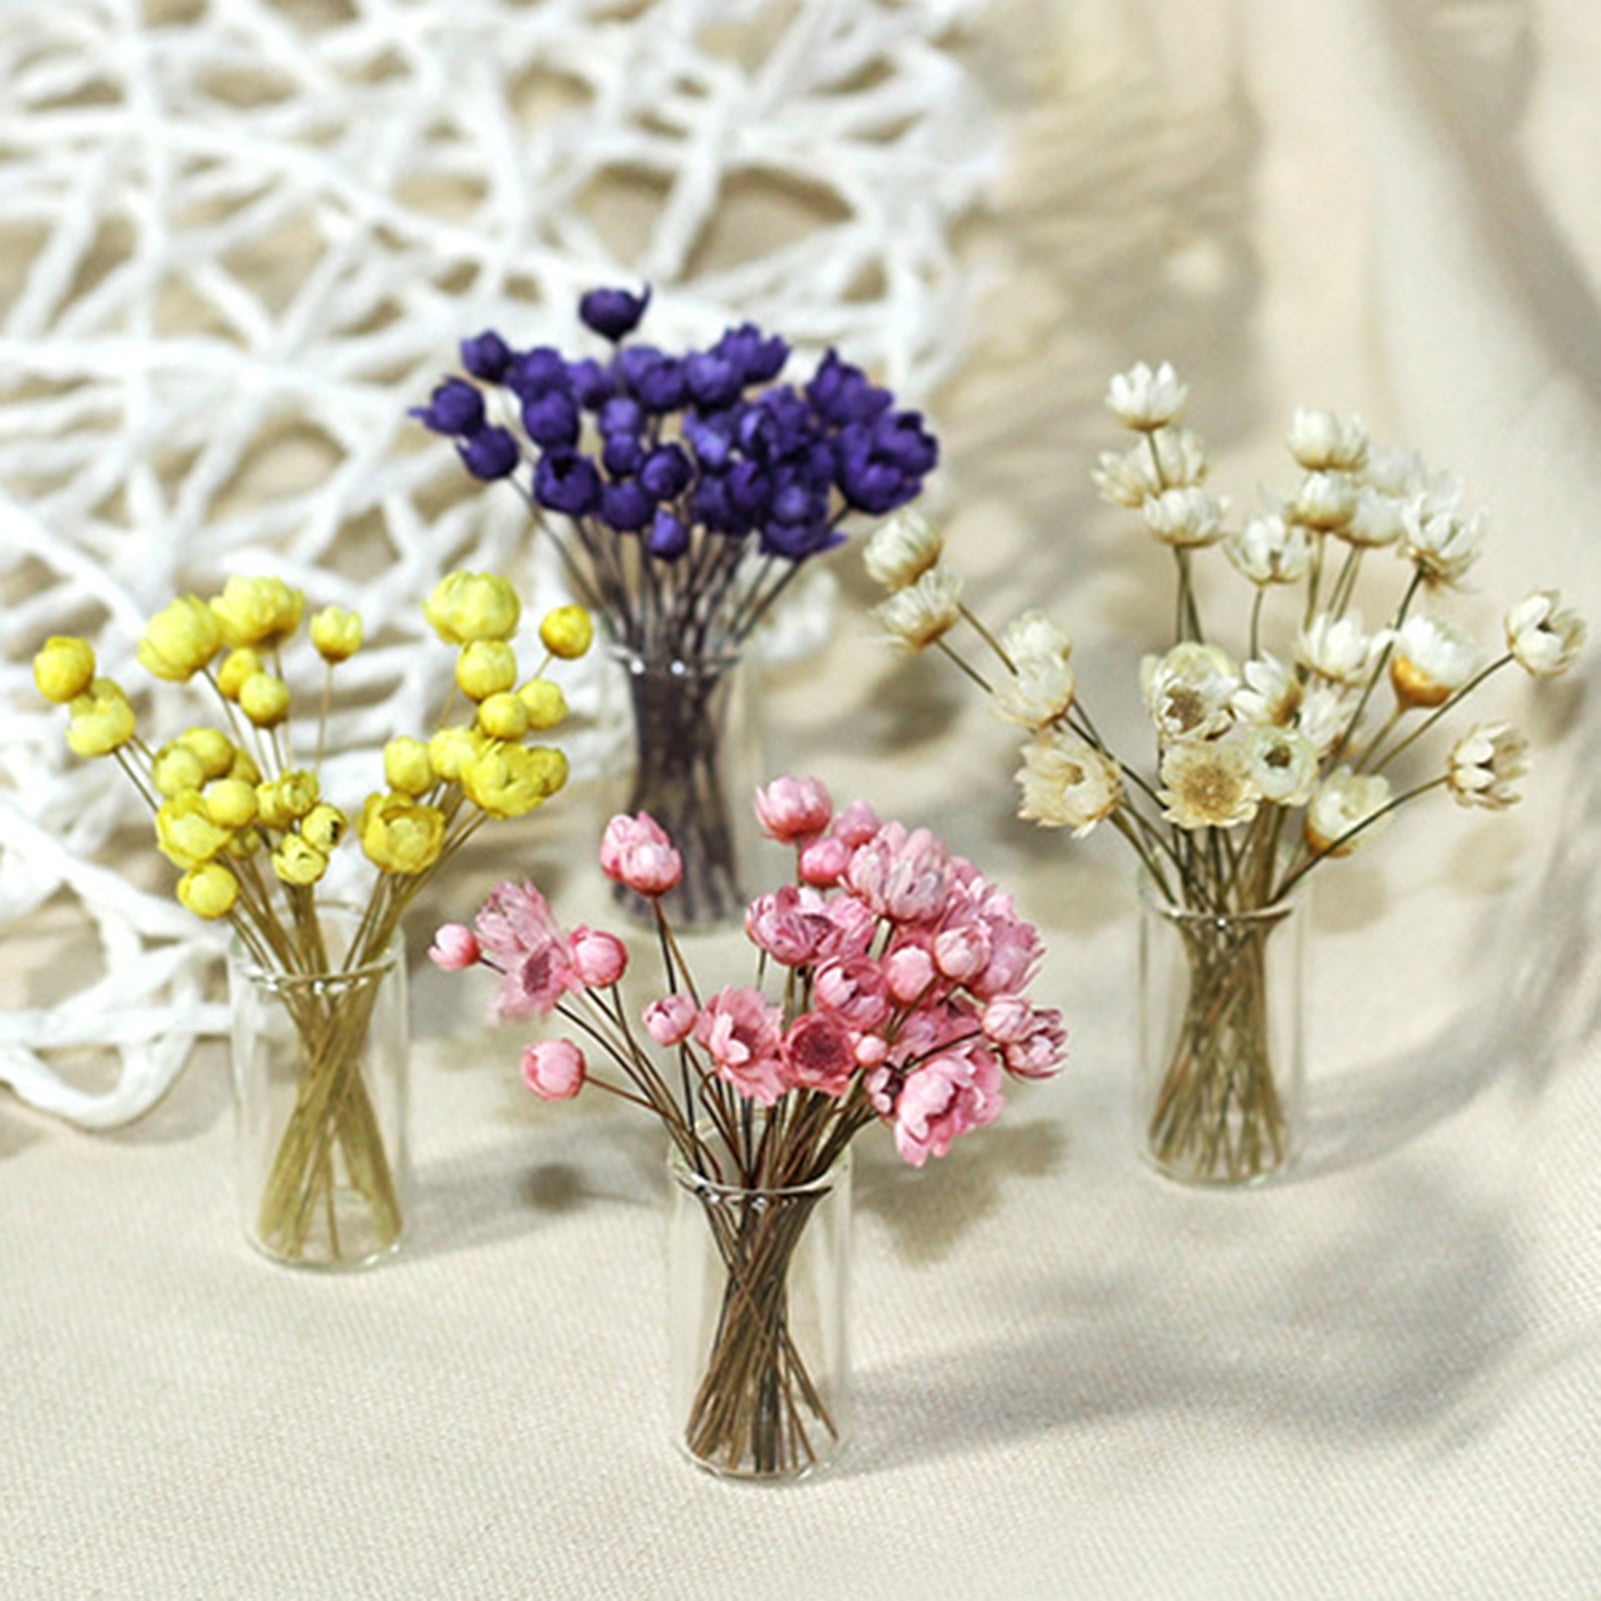  6 Pcs Dried Flowers for Crafts, Mini Dried Flowers with Stems  for Crafts Bulk, Dried Flowers for Vase : Home & Kitchen